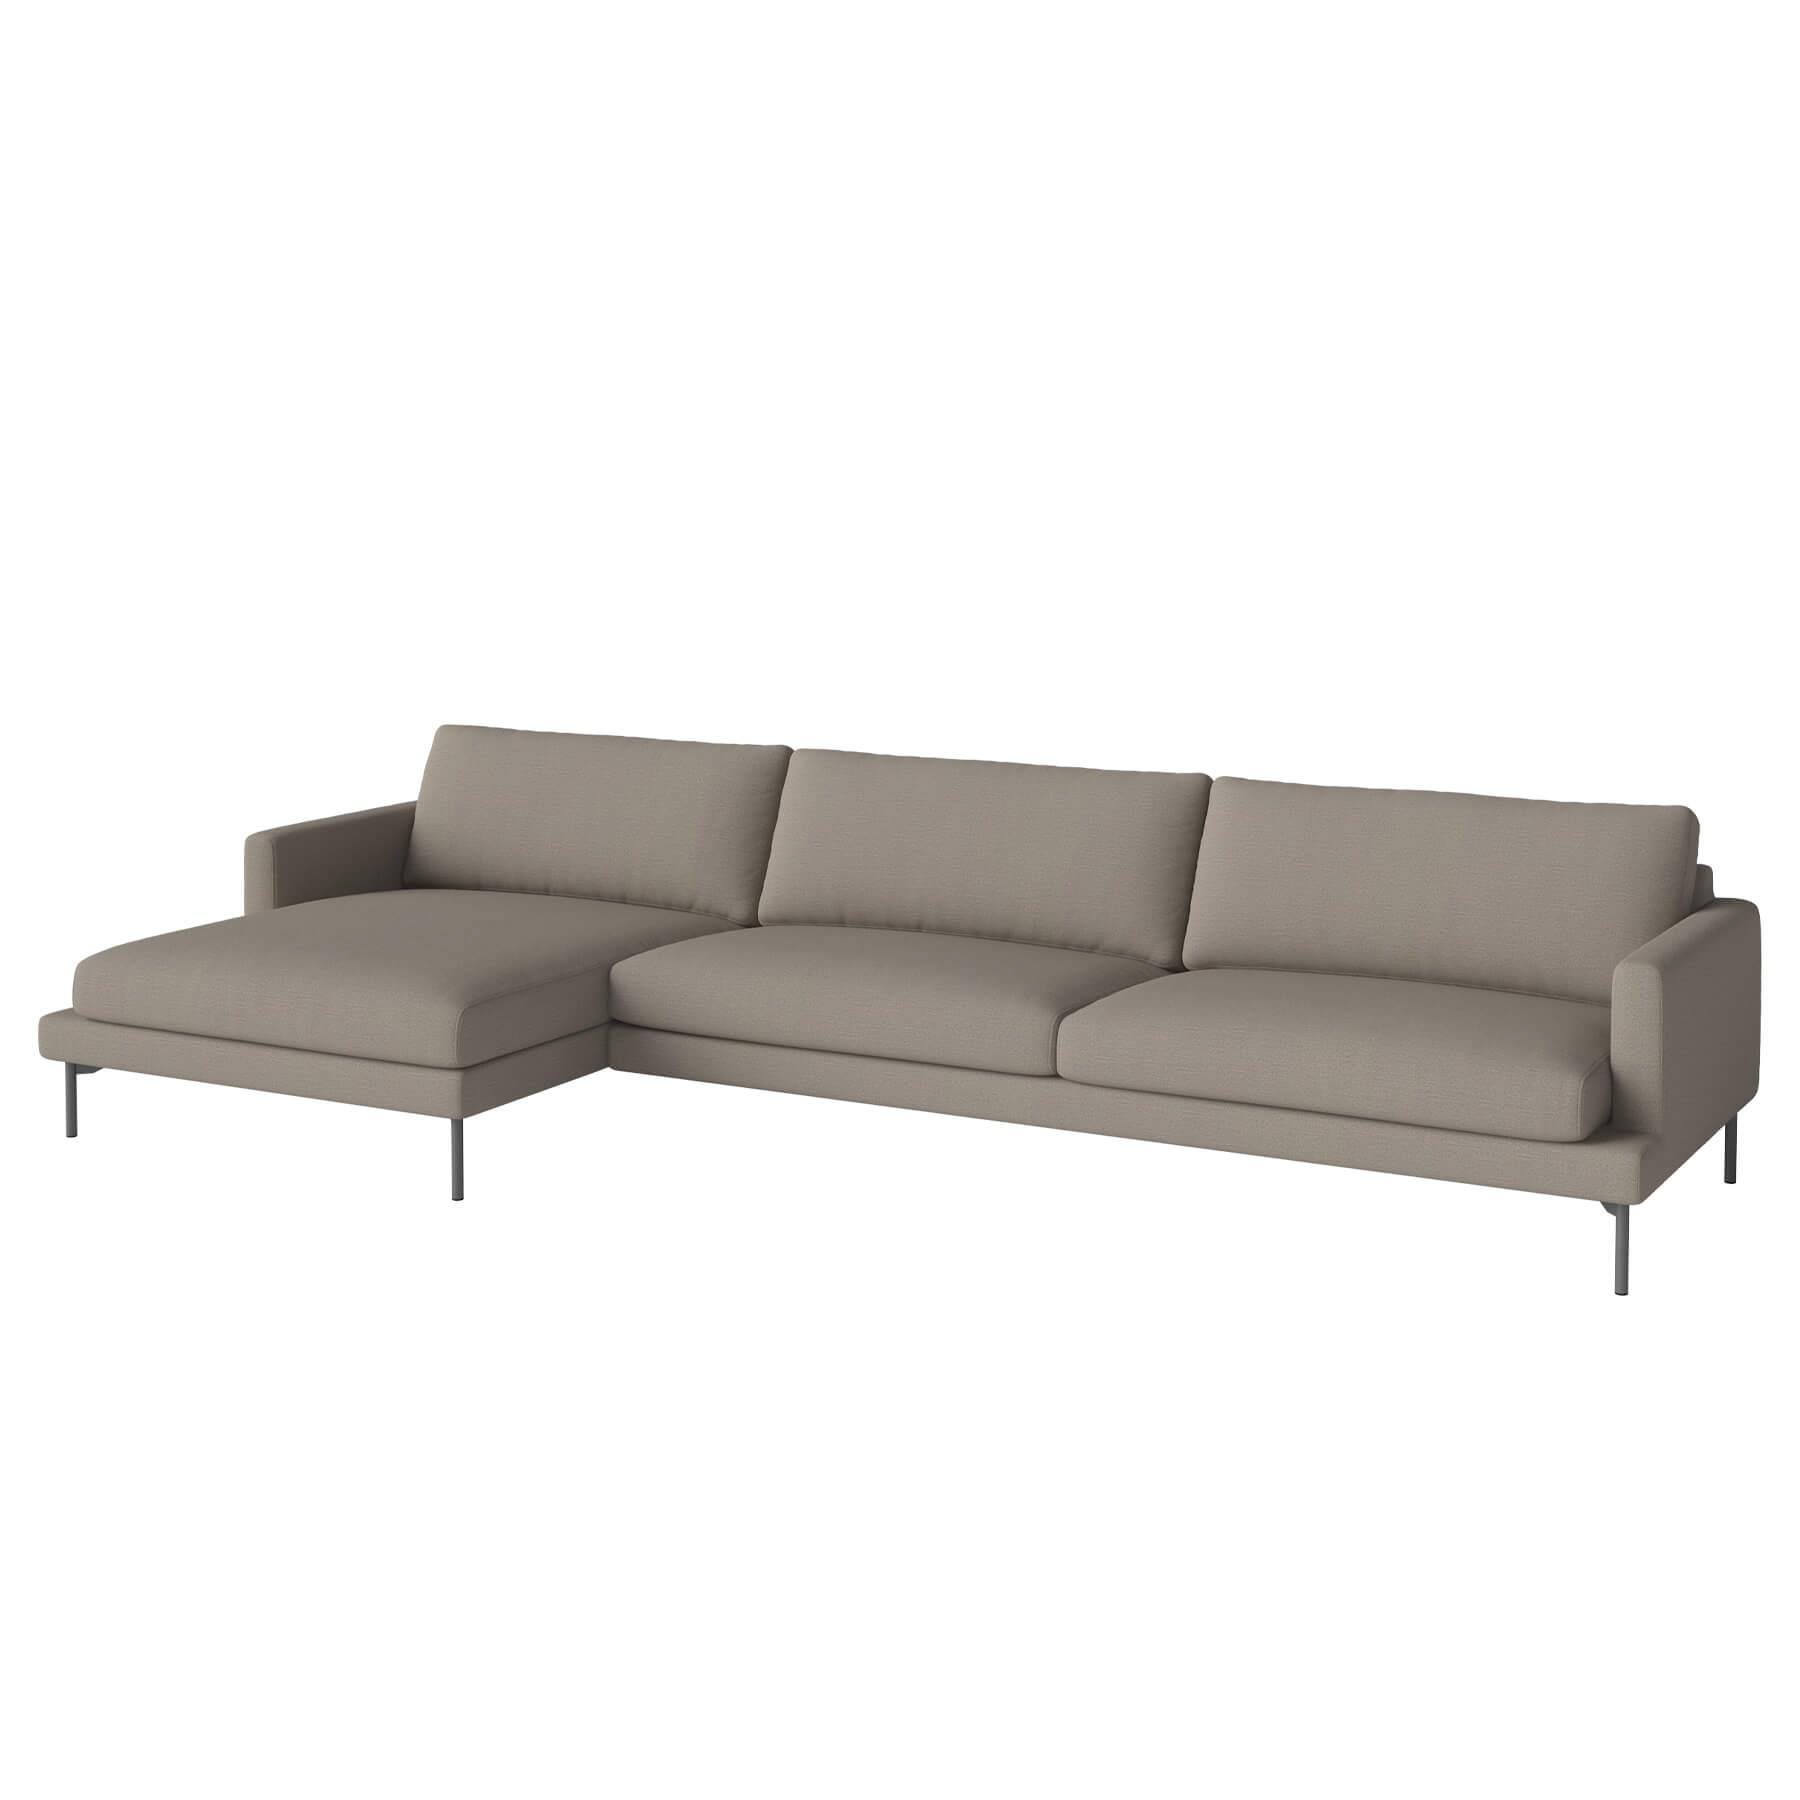 Bolia Veneda Sofa 45 Seater Sofa With Chaise Longue Grey Laquered Steel Baize Dark Beige Left Brown Designer Furniture From Holloways Of Ludlow